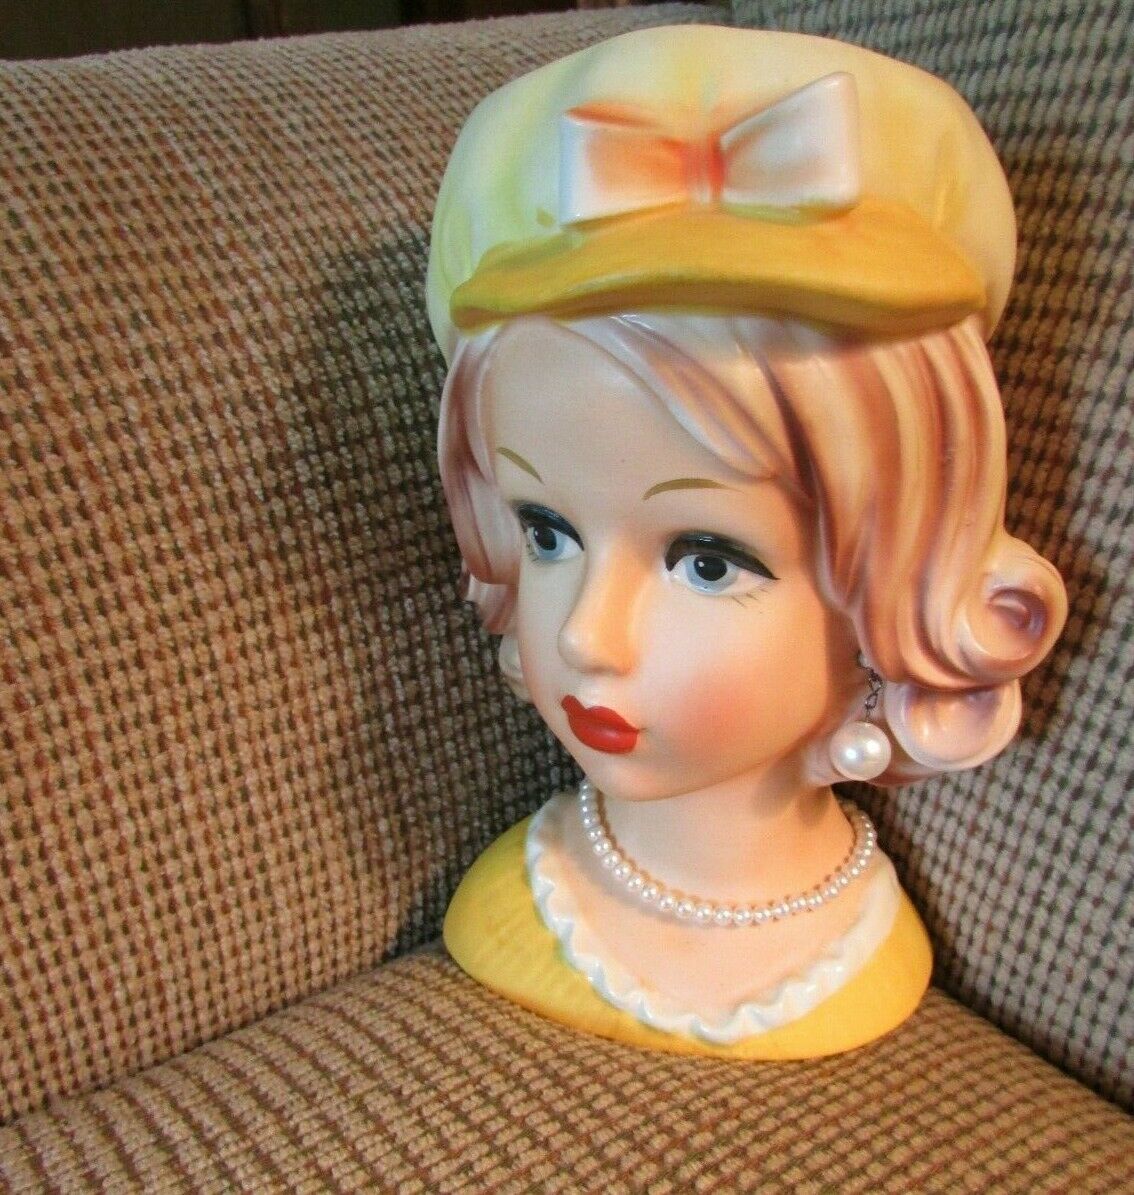 Lady Head Vase Teenager With Mod 70s Outfit. Yellow Outfit. 7 In Excellent